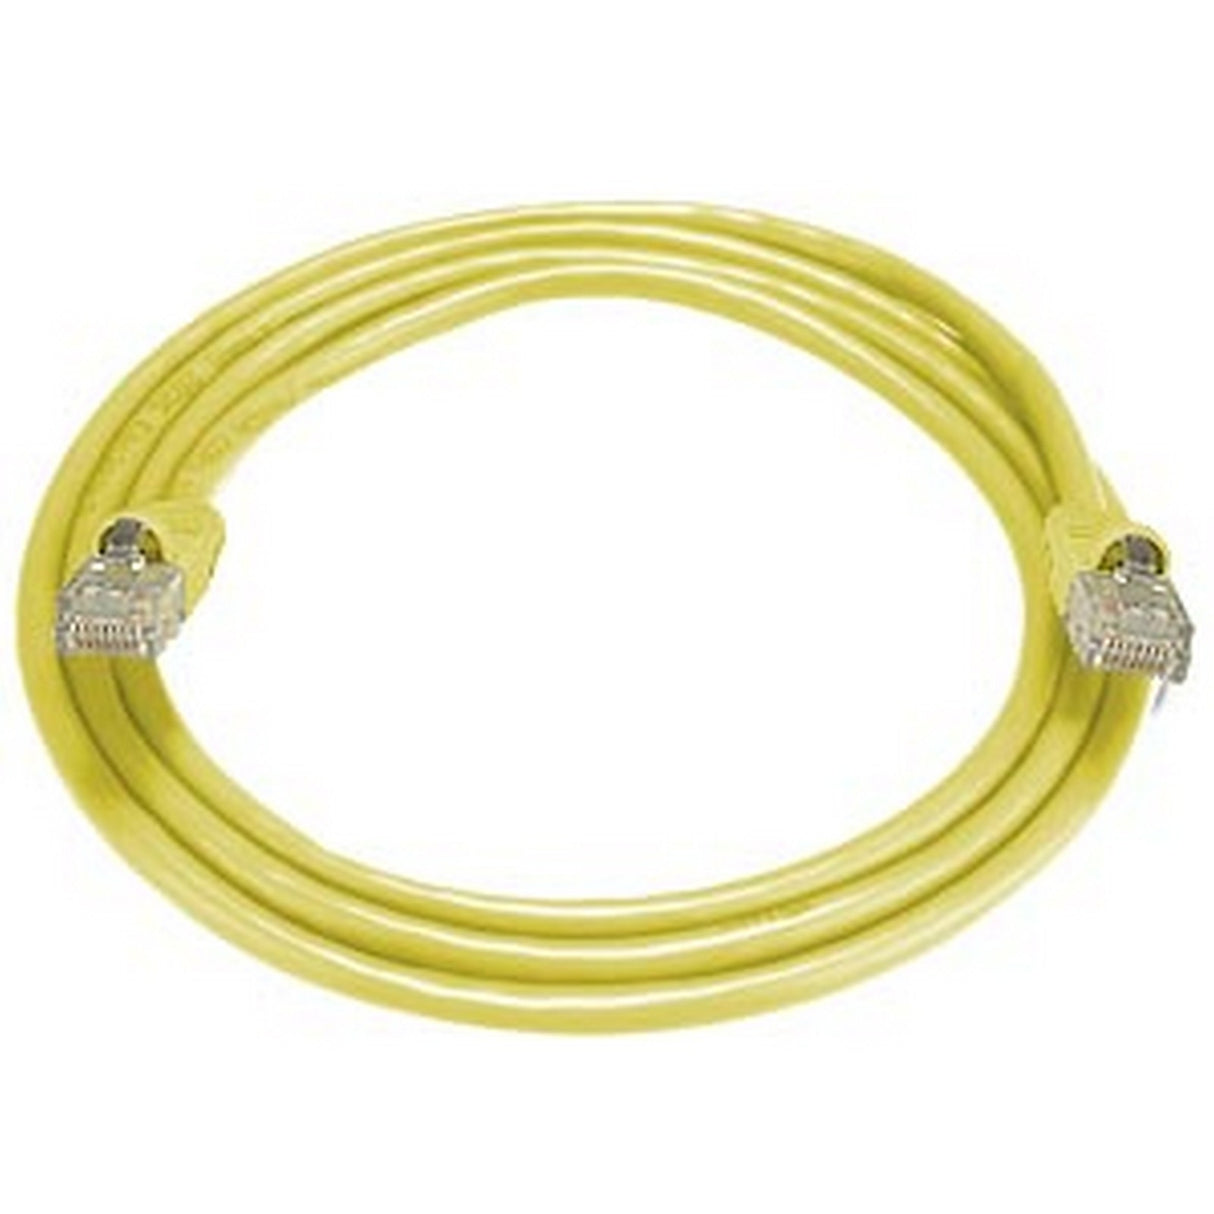 NTI CAT5E-10-YELLOW CAT5e Stranded Unshielded Cable, Yellow, 10-Foot